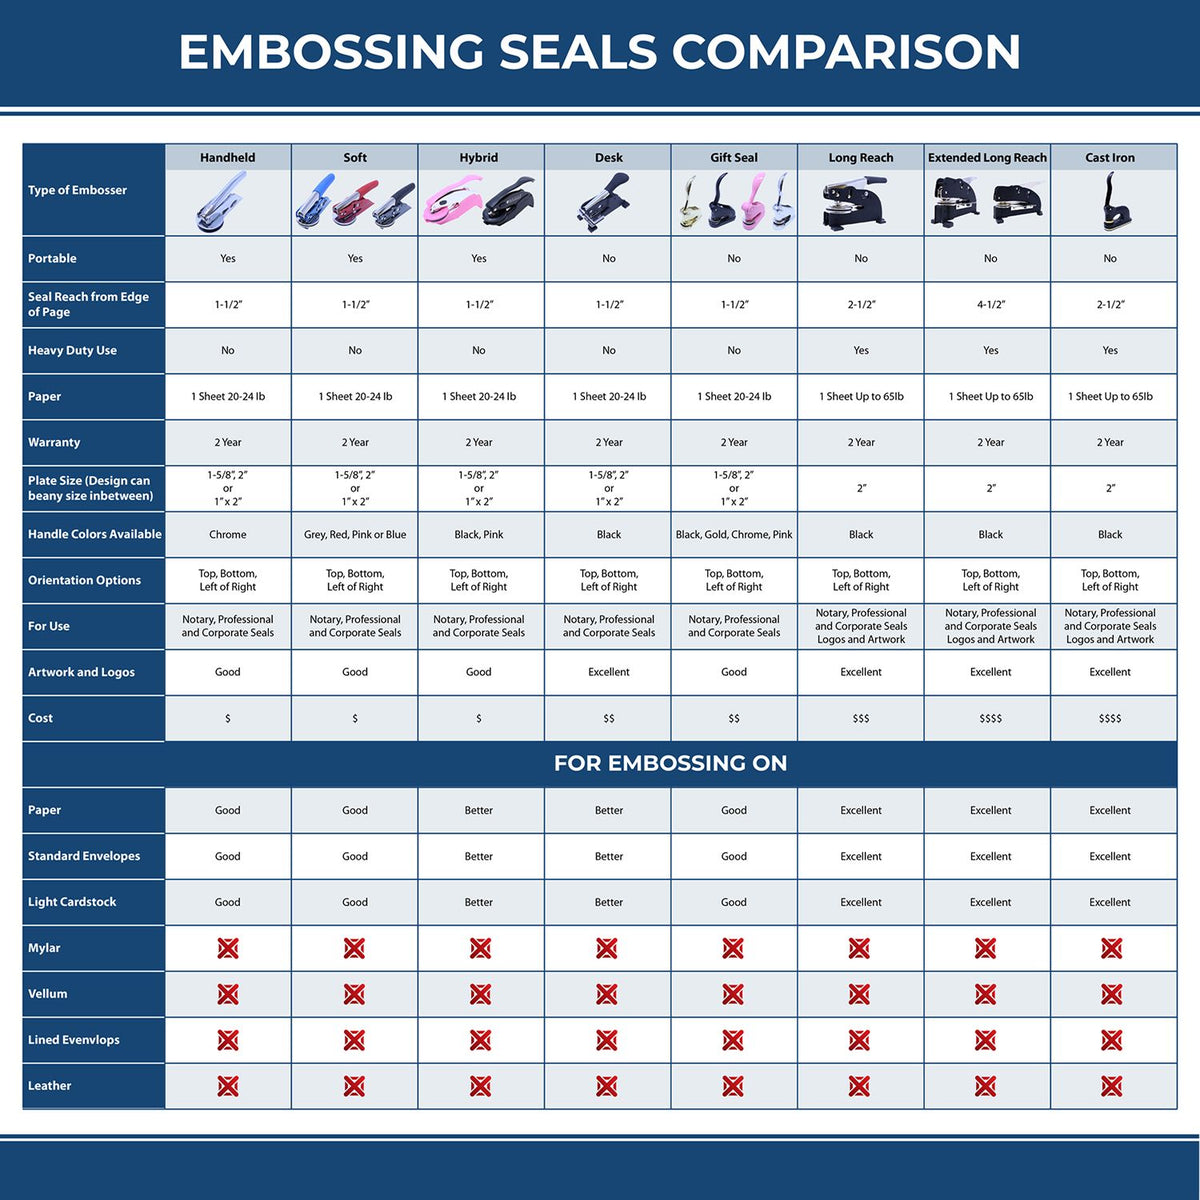 A comparison chart for the different types of mount models available for the Long Reach Washington PE Seal.